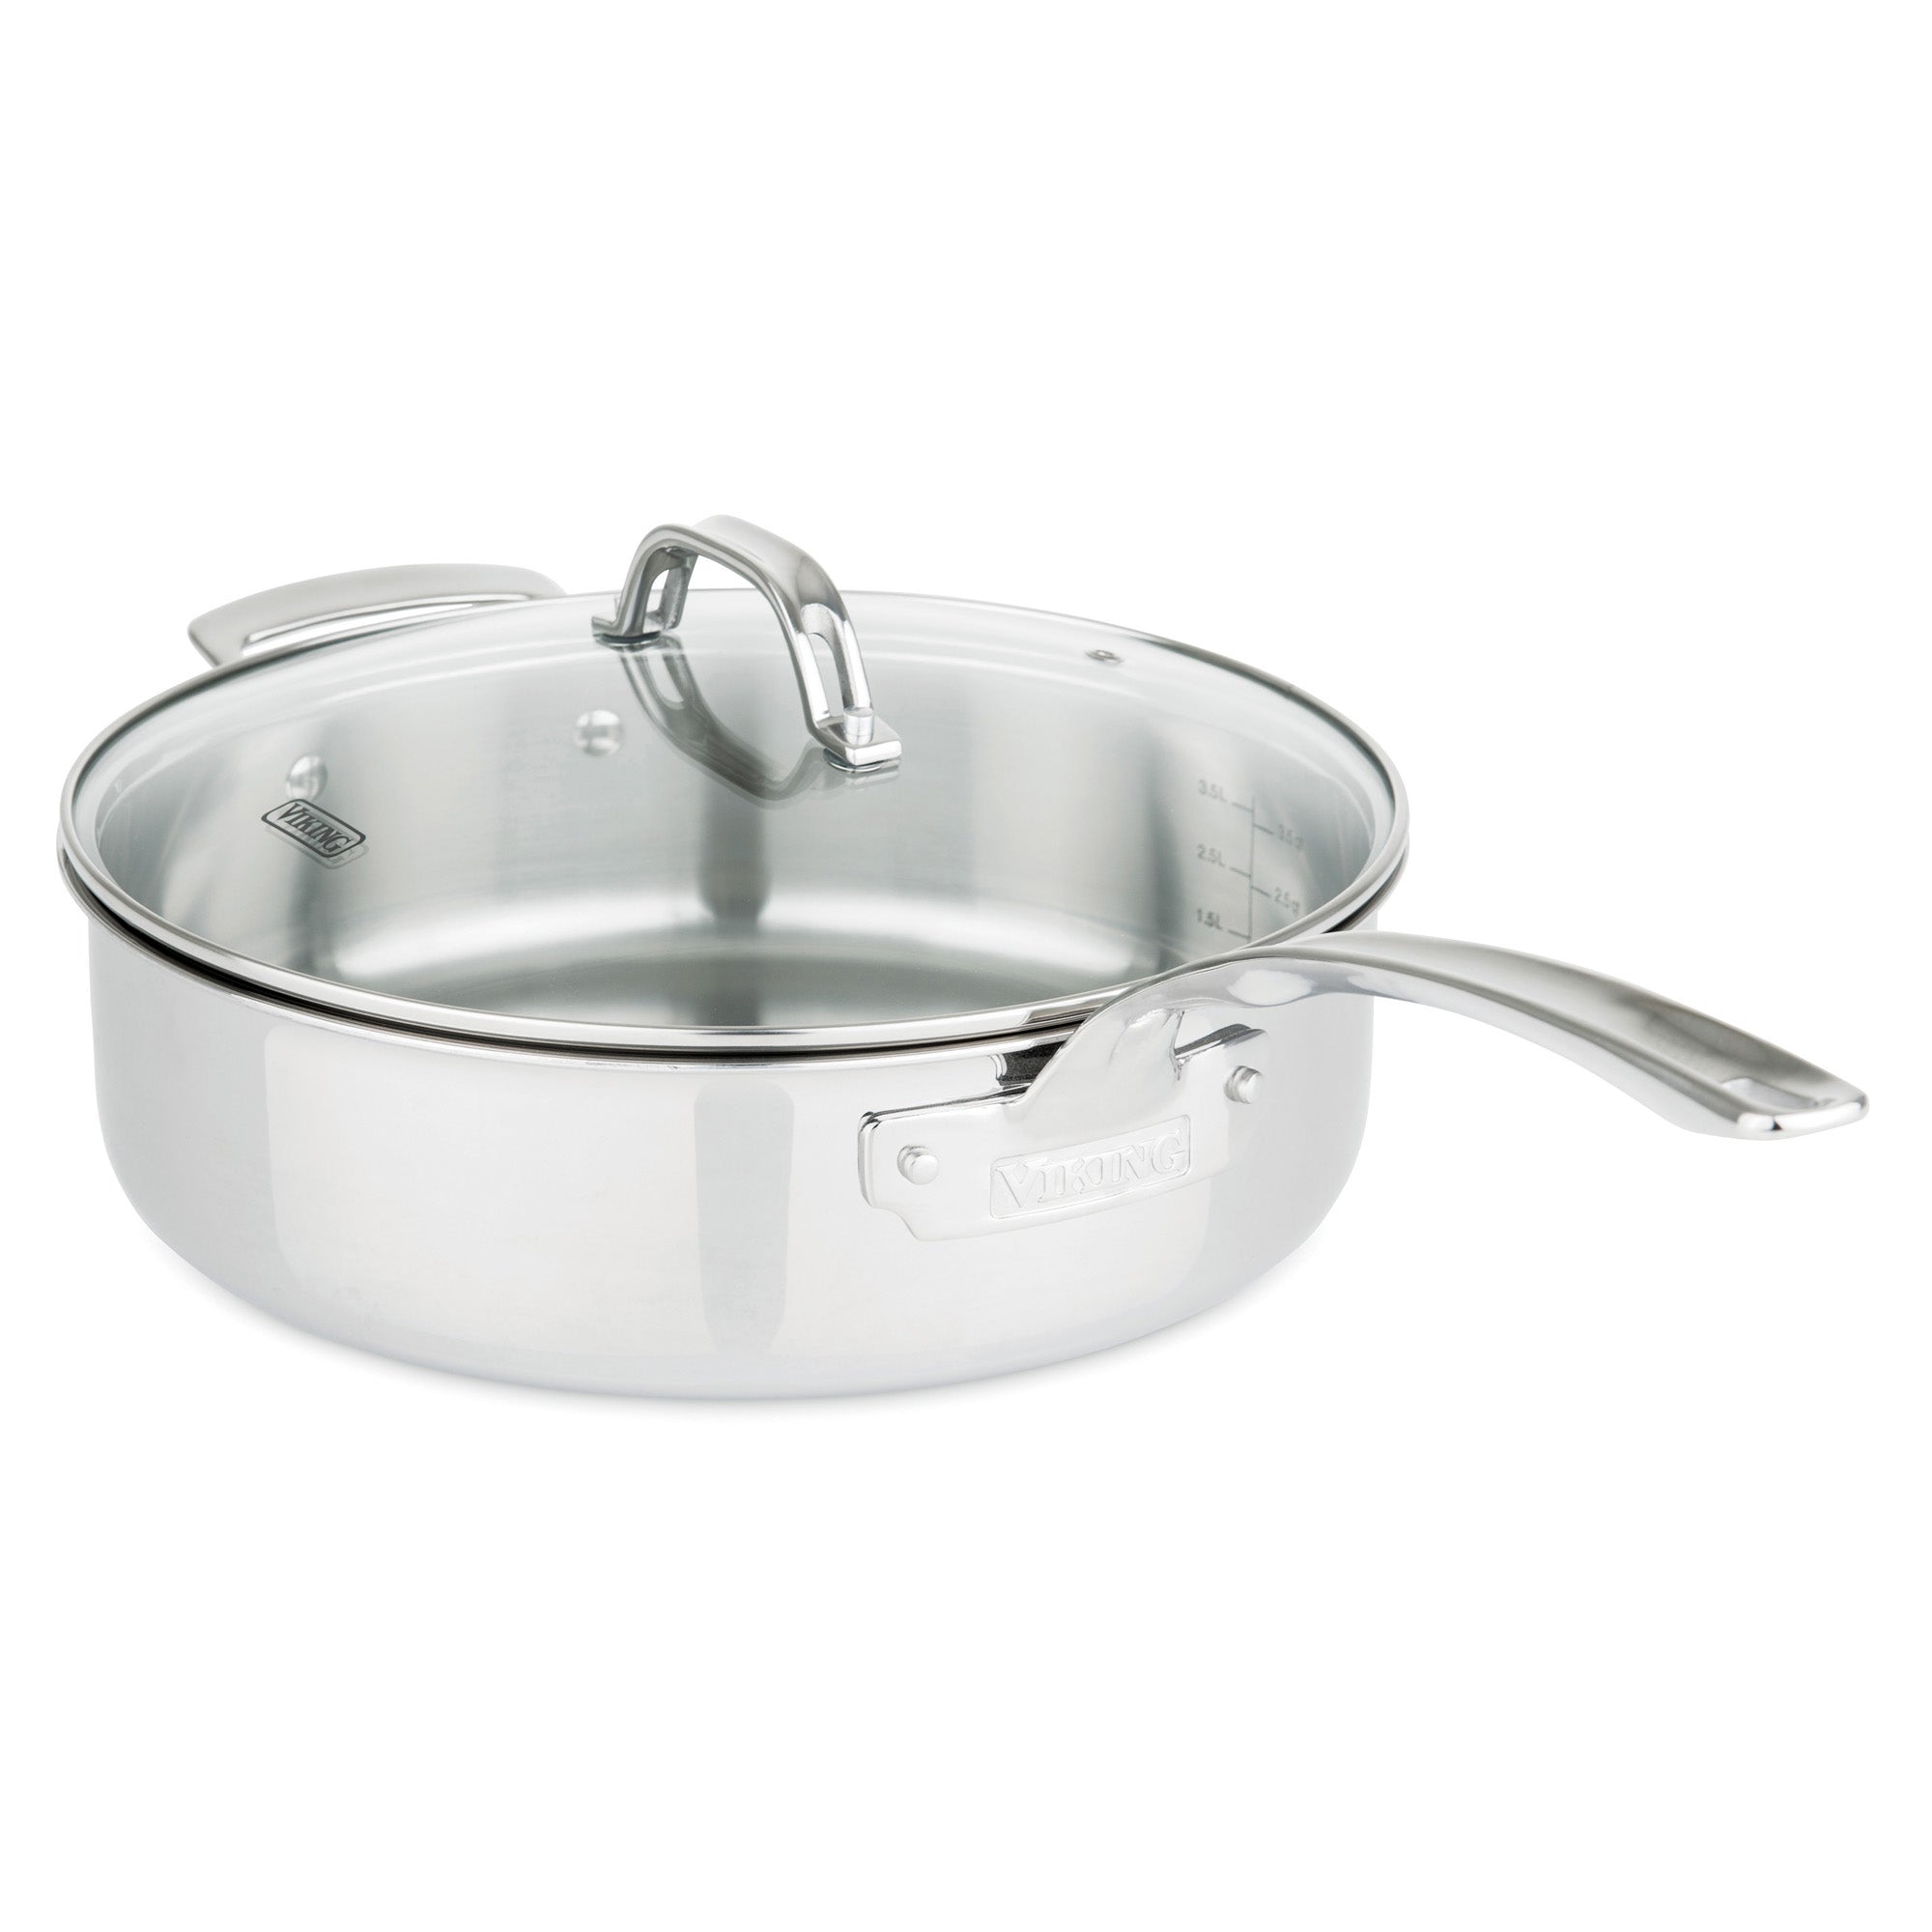 KitchenAid 3-Ply Cookware Set 15-in Stainless Steel Cookware Set